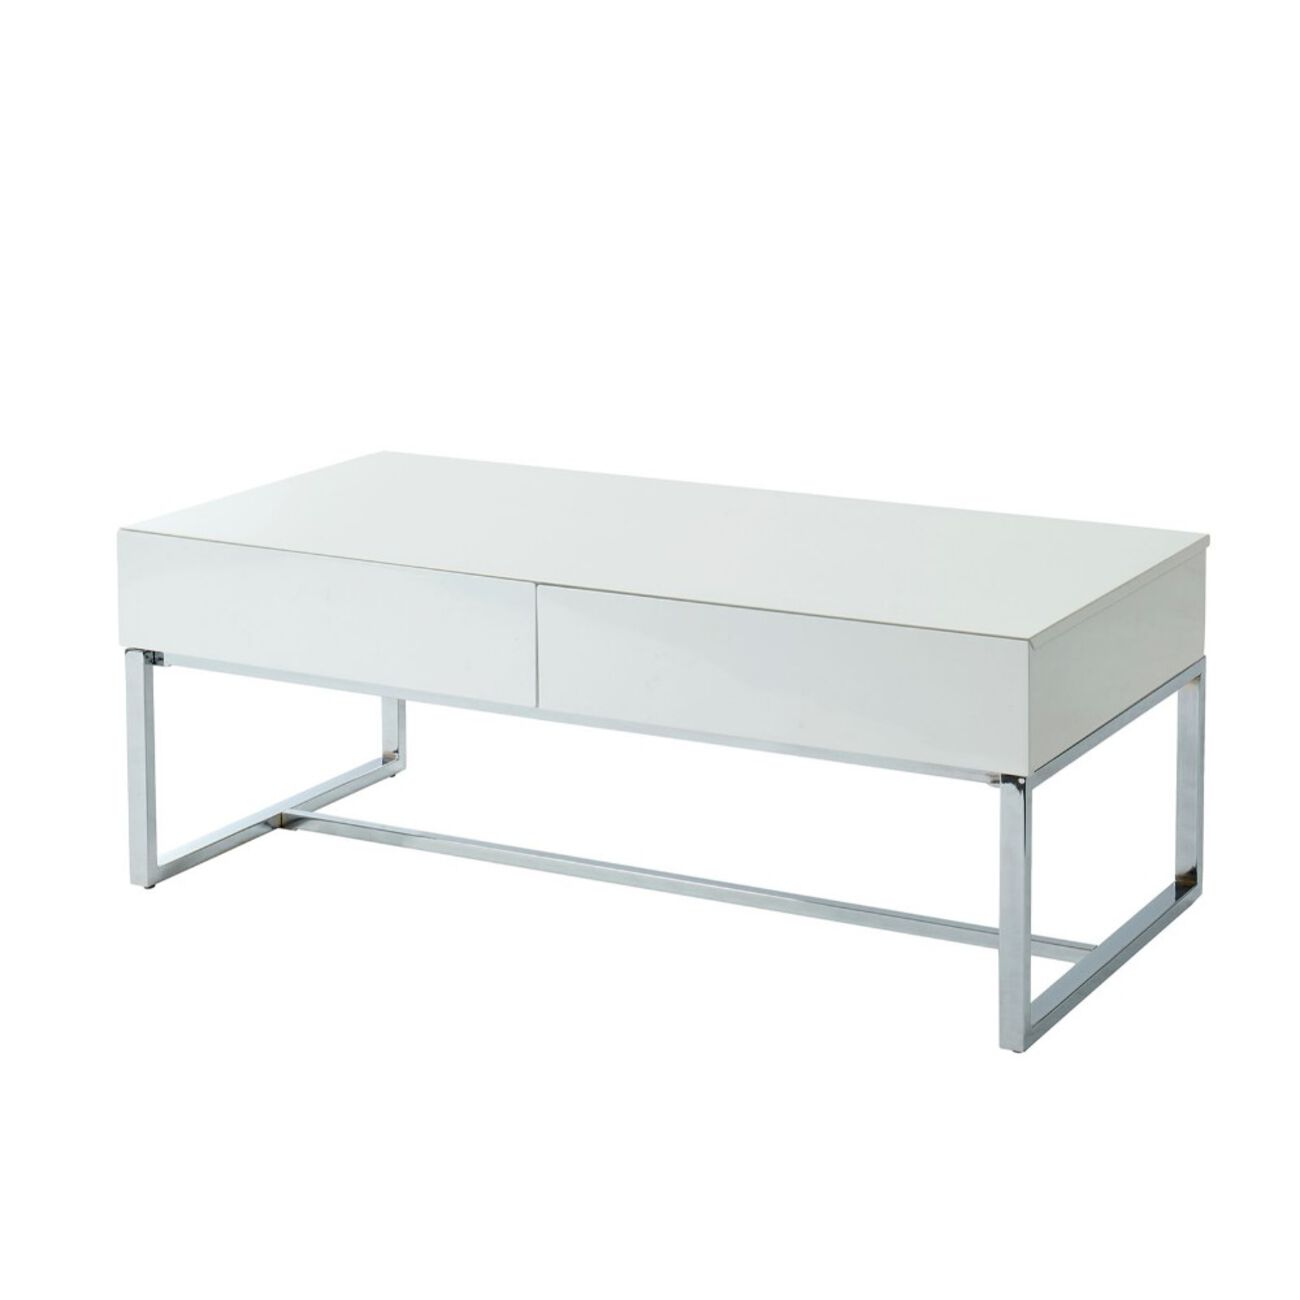 Contemporary Rectangular Coffee Table with Two Drawers and Metal Base, White and Silver